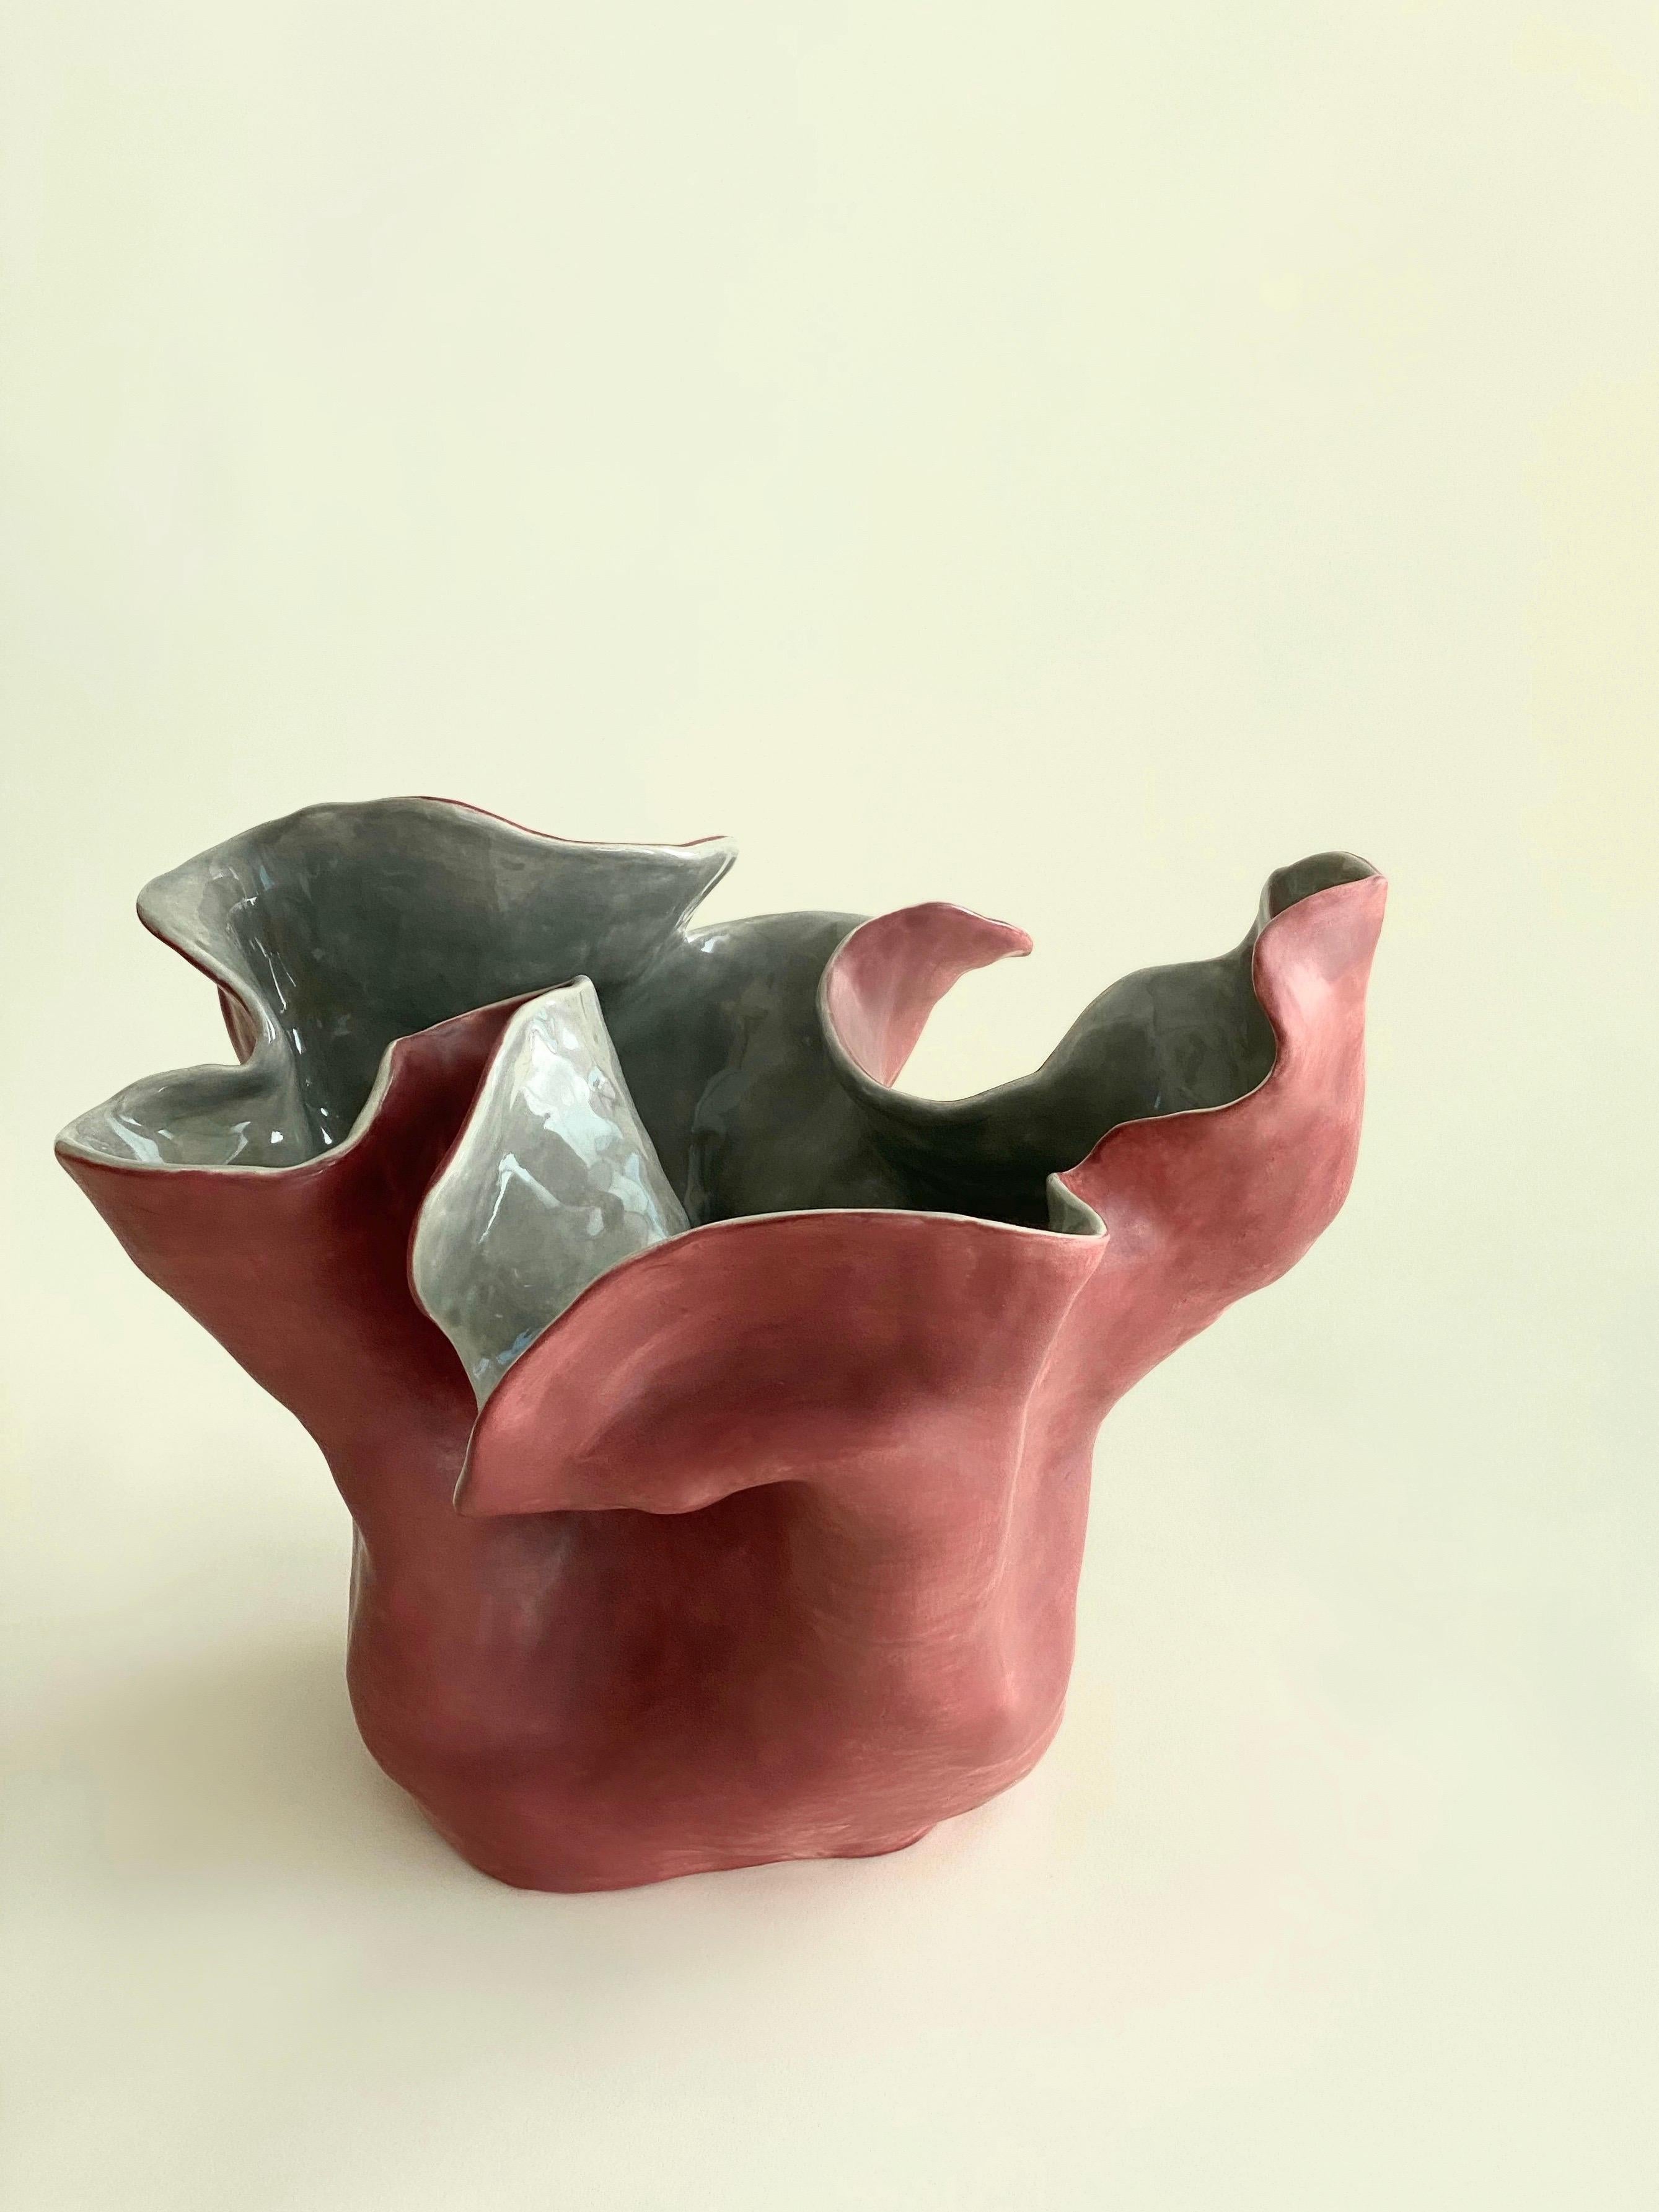 Visceral II, Red and grey, 2020 by Magda von Hanau
From the series Visceral
Clay Sculpture with Glass Glaze
Dimensions: 30.4 H x 40.6 W cm 

The Visceral series delves into the intricate relationship between the mind and the body, specifically